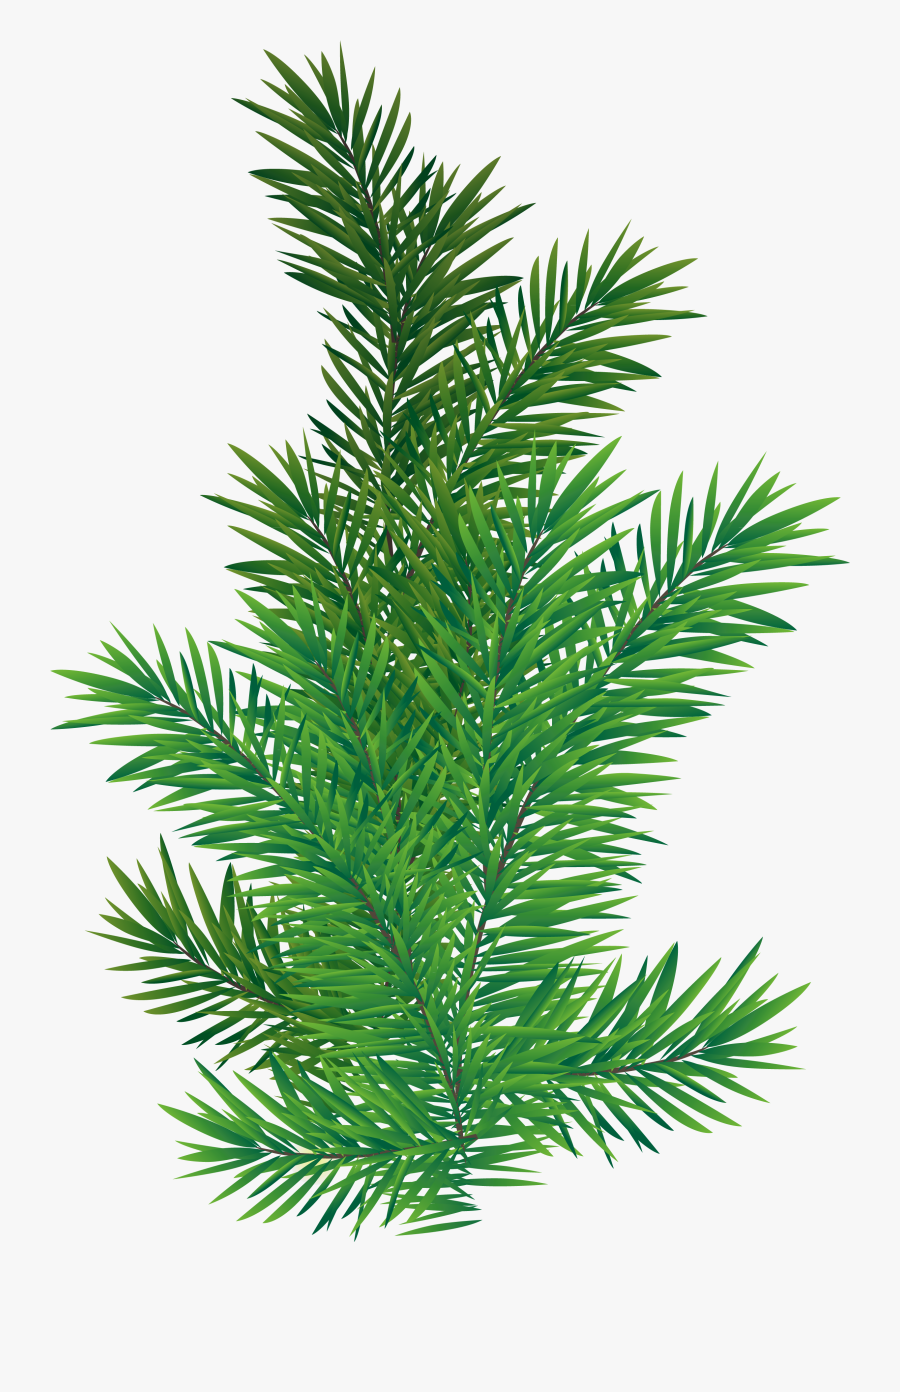 Pine Branches Png - Pine Tree Branch Png, Transparent Clipart